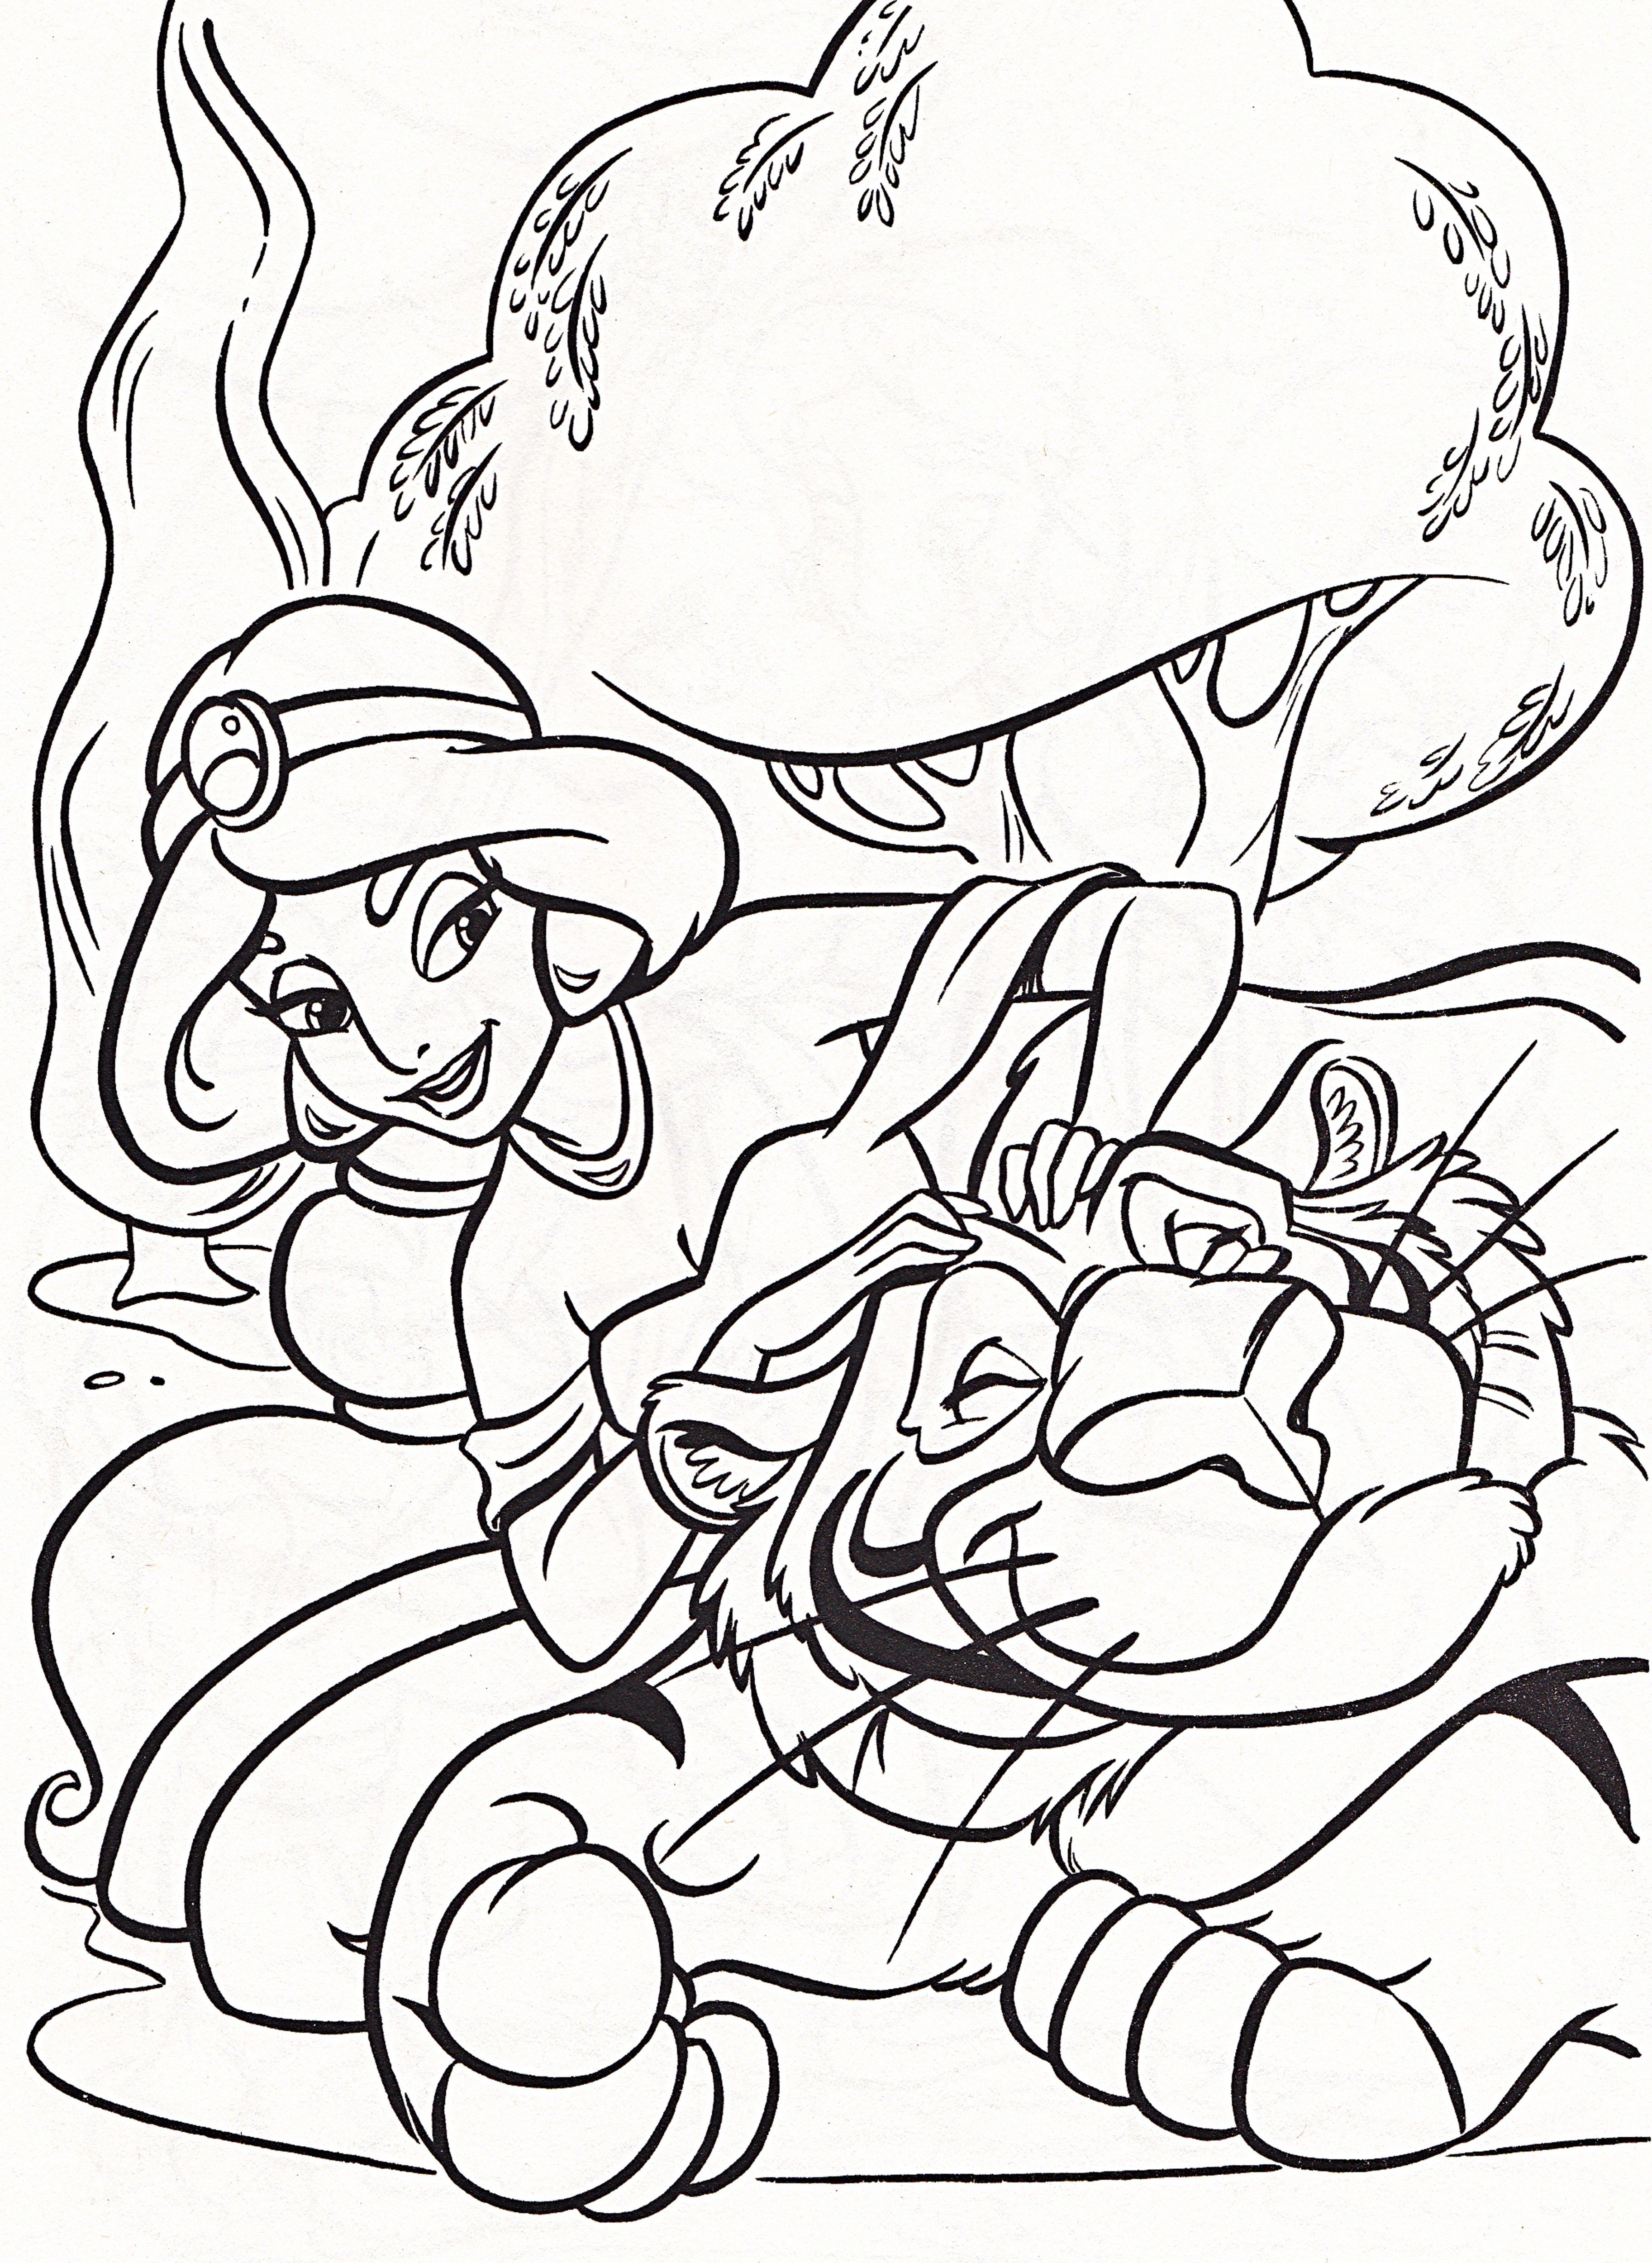 Disney Princess Coloring Pages Jasmine - Coloring Home